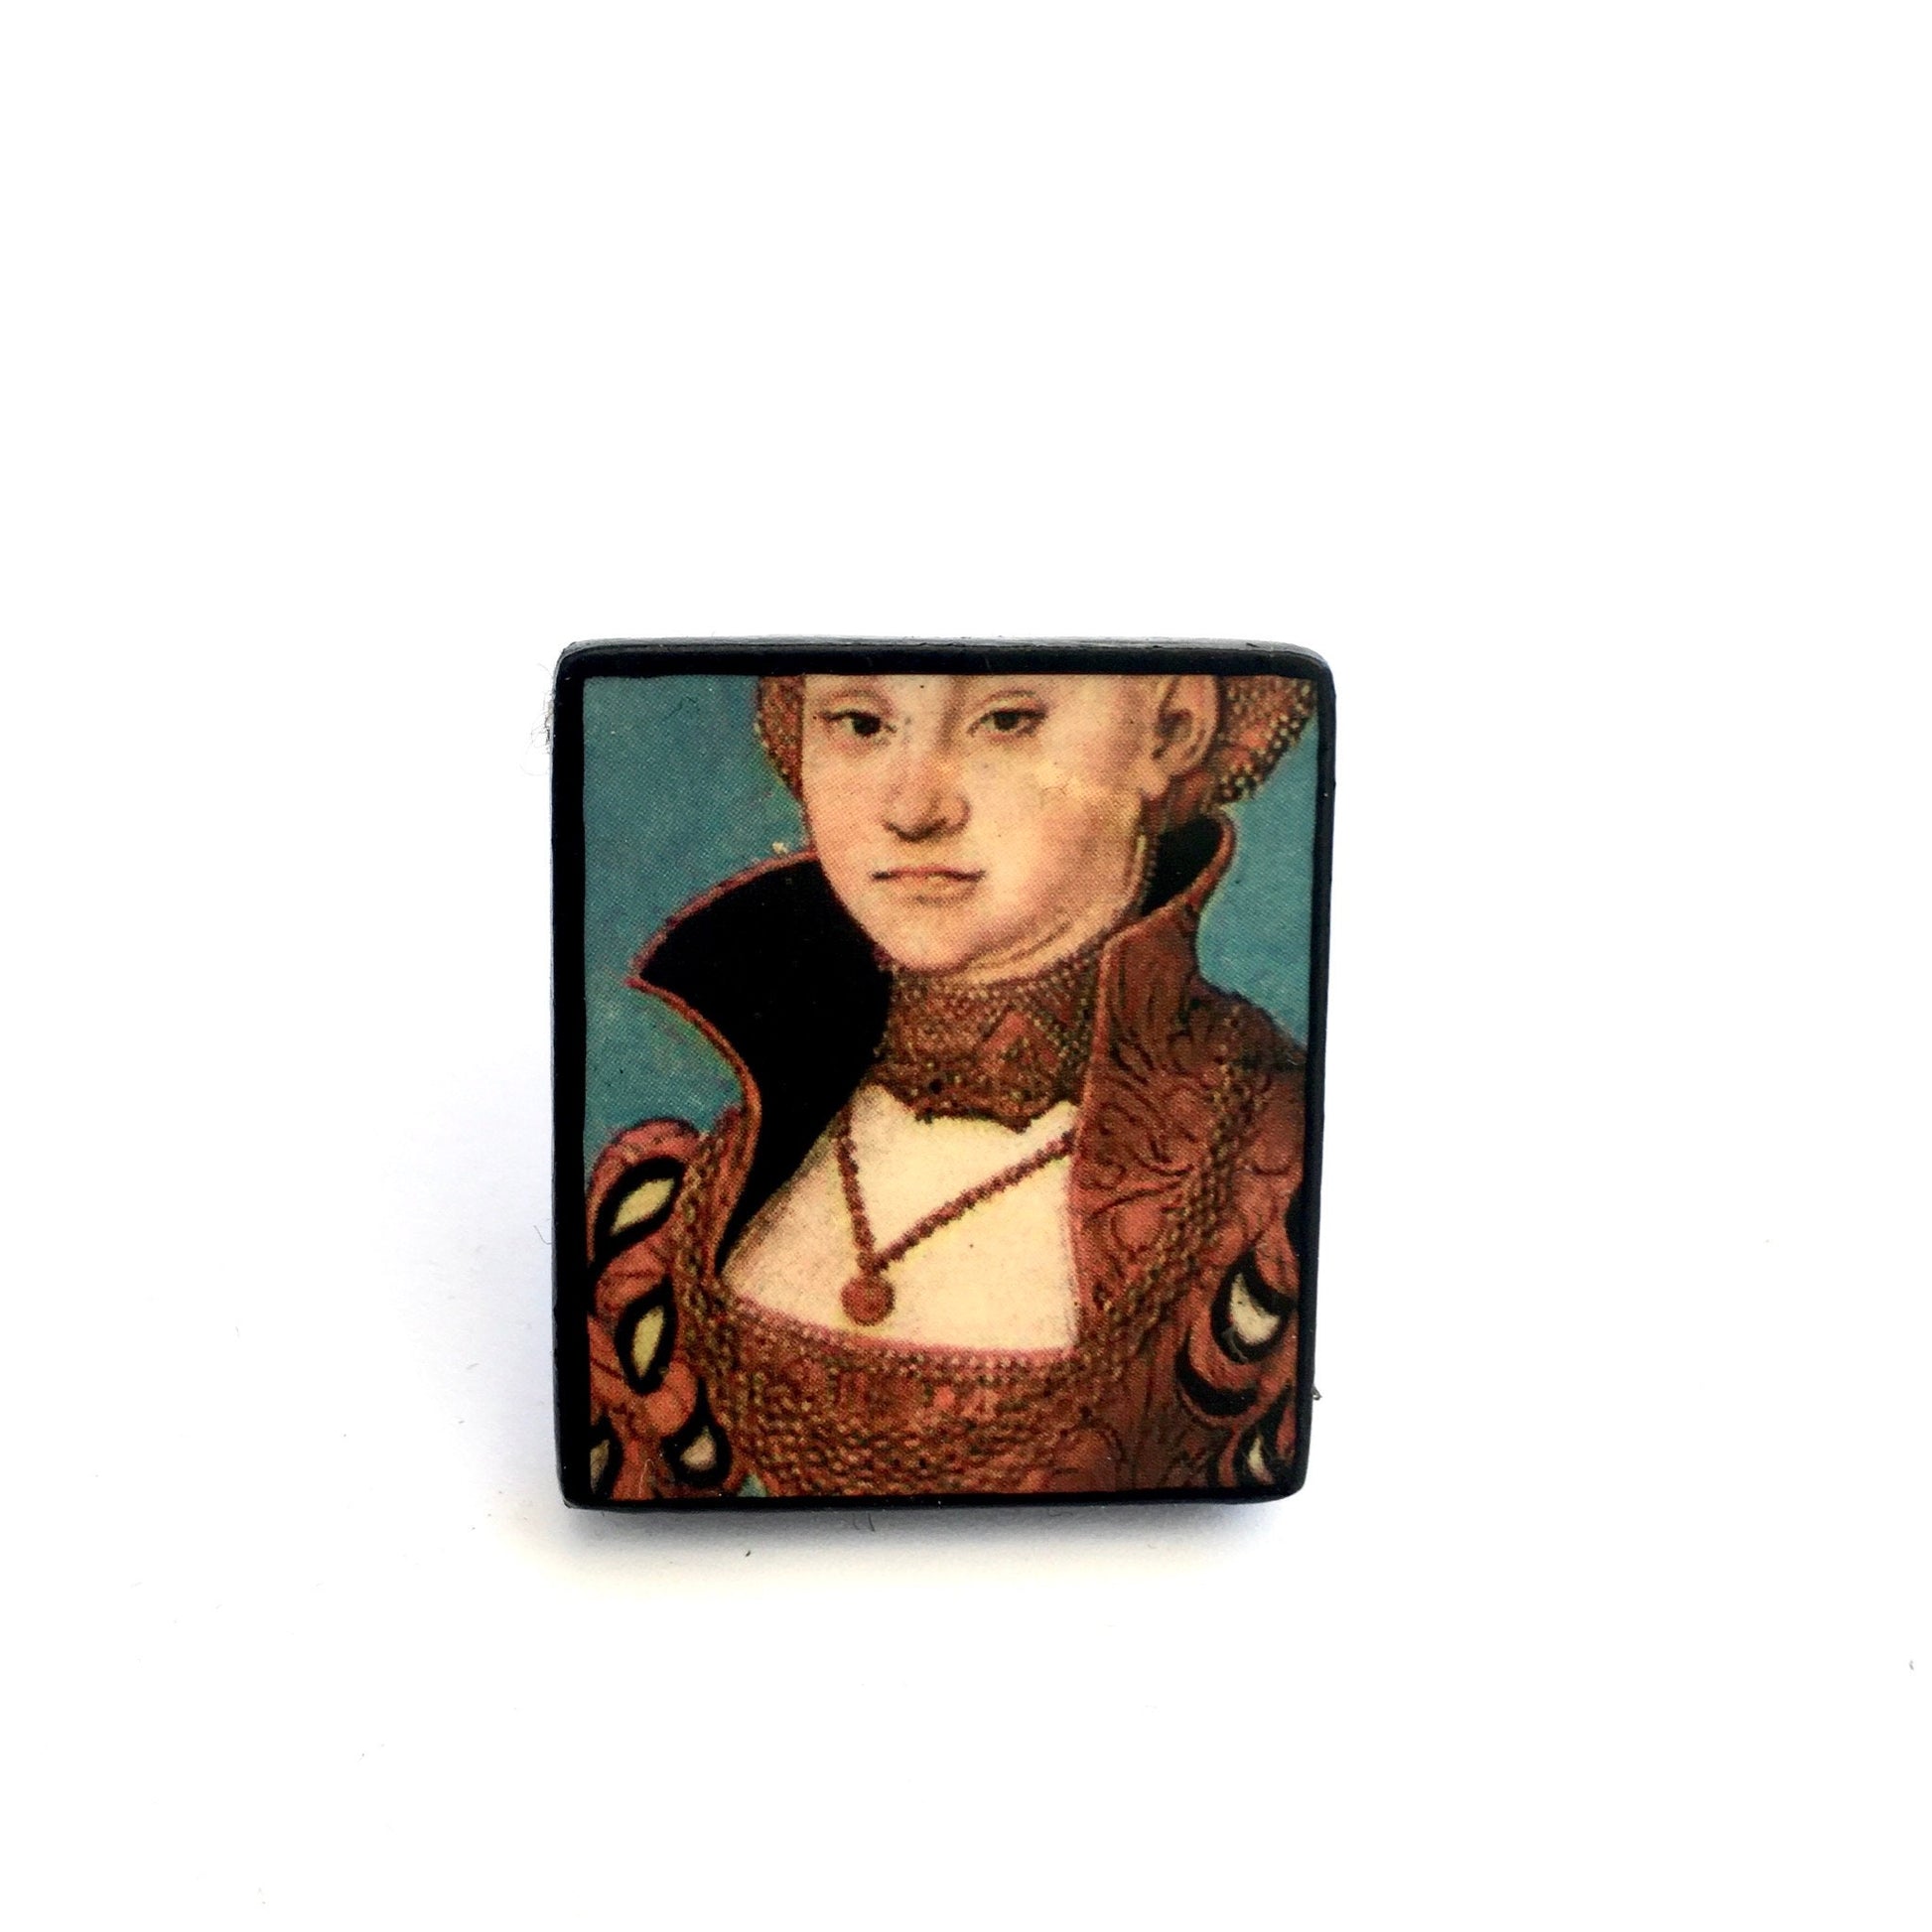 Adjustable, sustainable wooden ring for women, inspired by German Renaissance artist Lucas Cranach. Obljewellery Lady portrait ring.